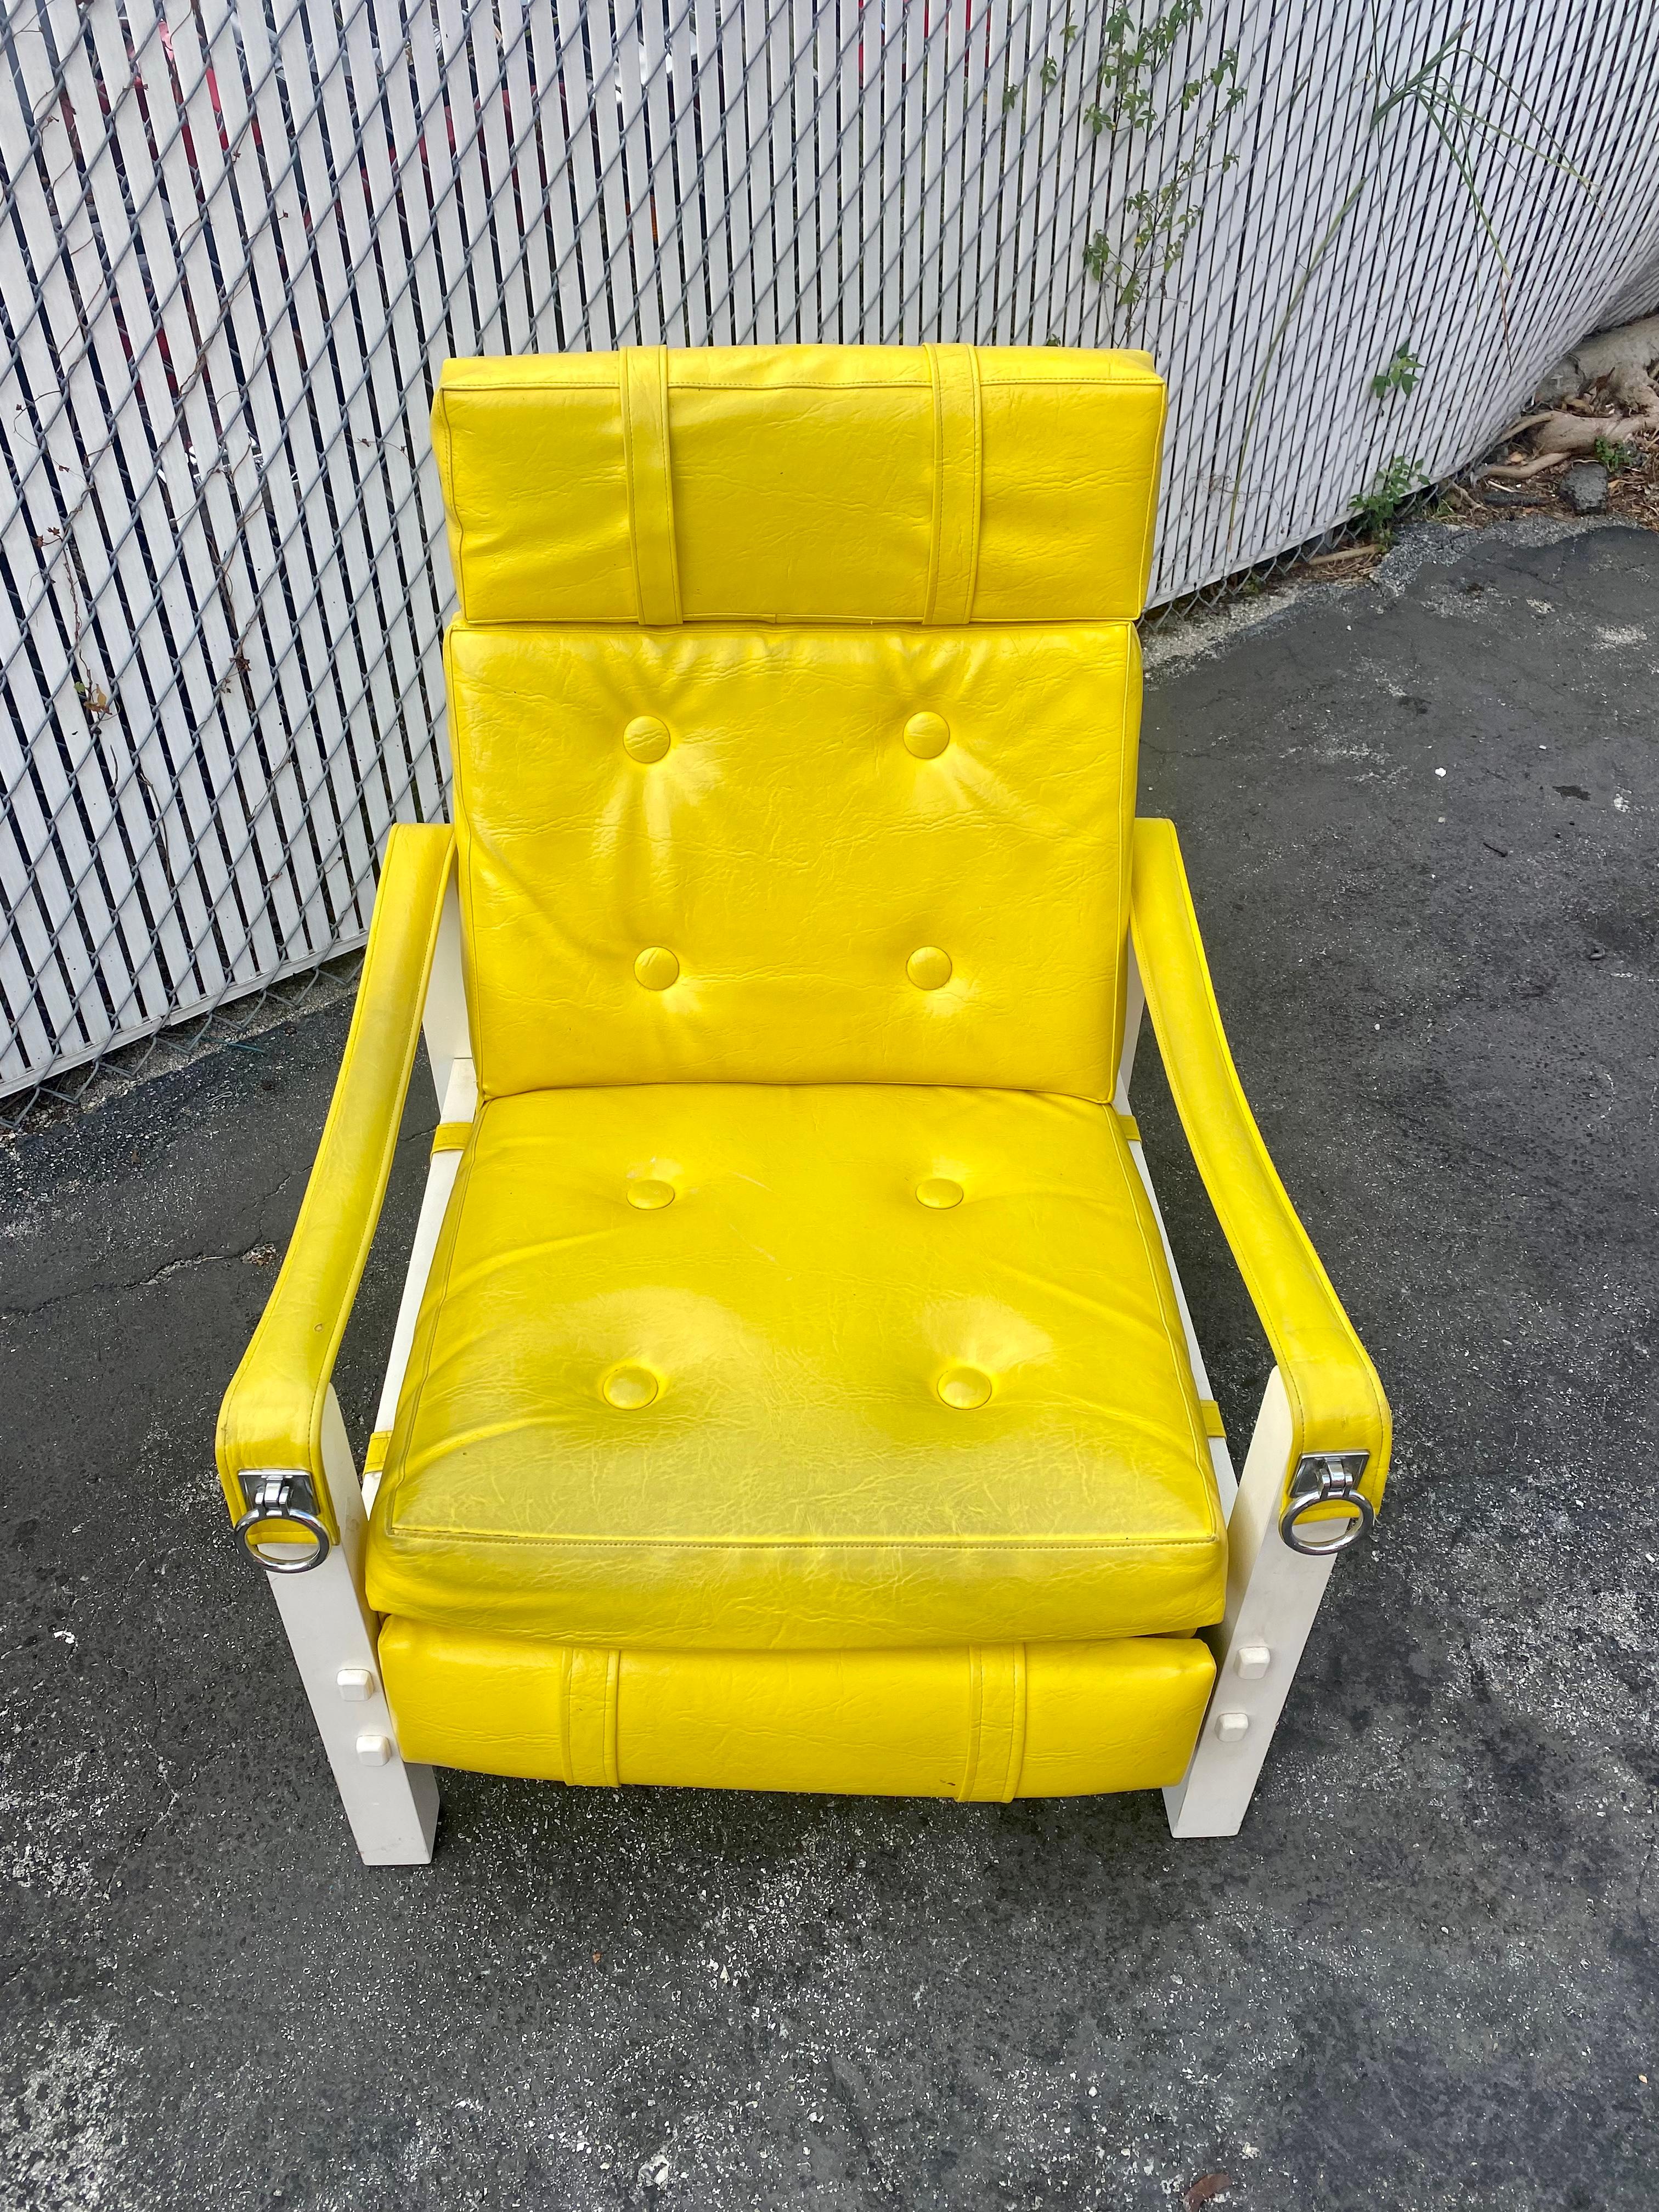 second hand recliner chairs for sale